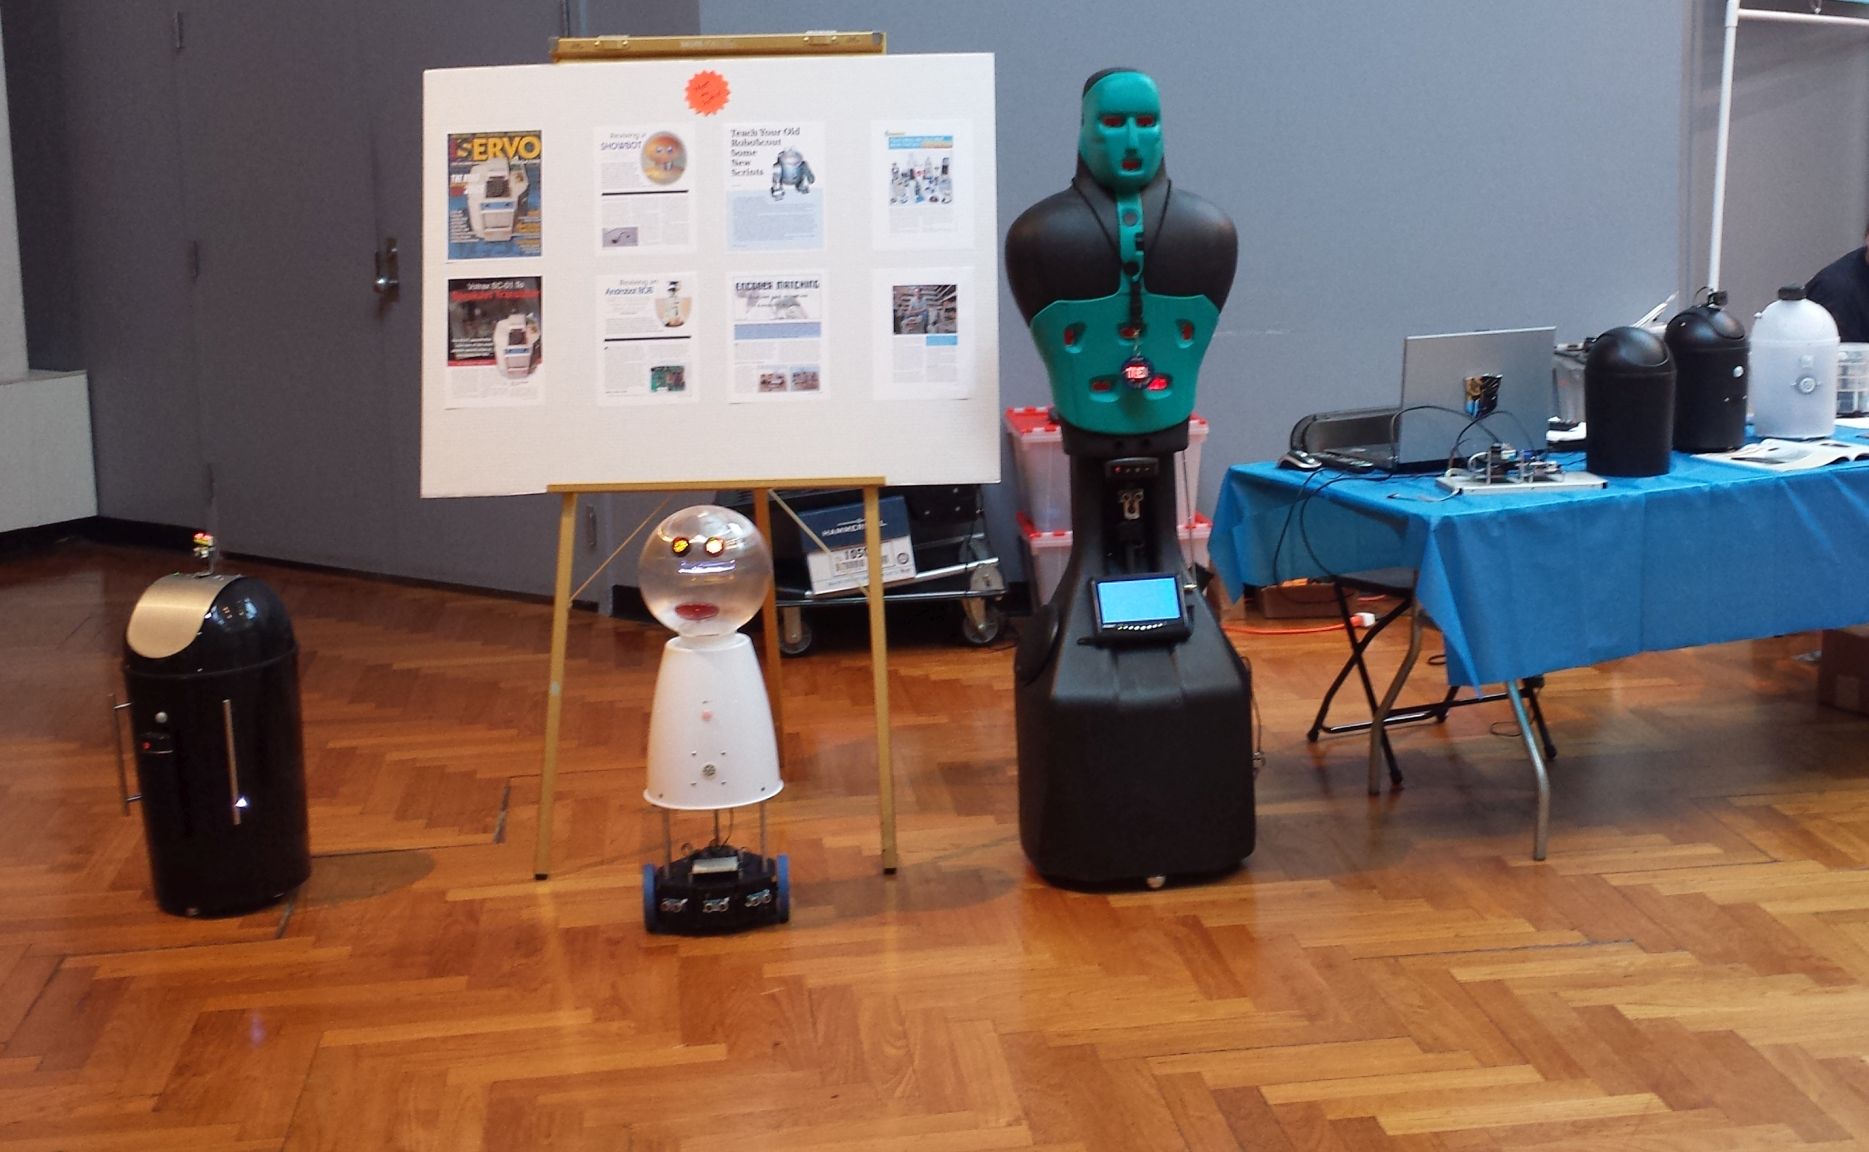 Robots at Henry Ford Maker Faire